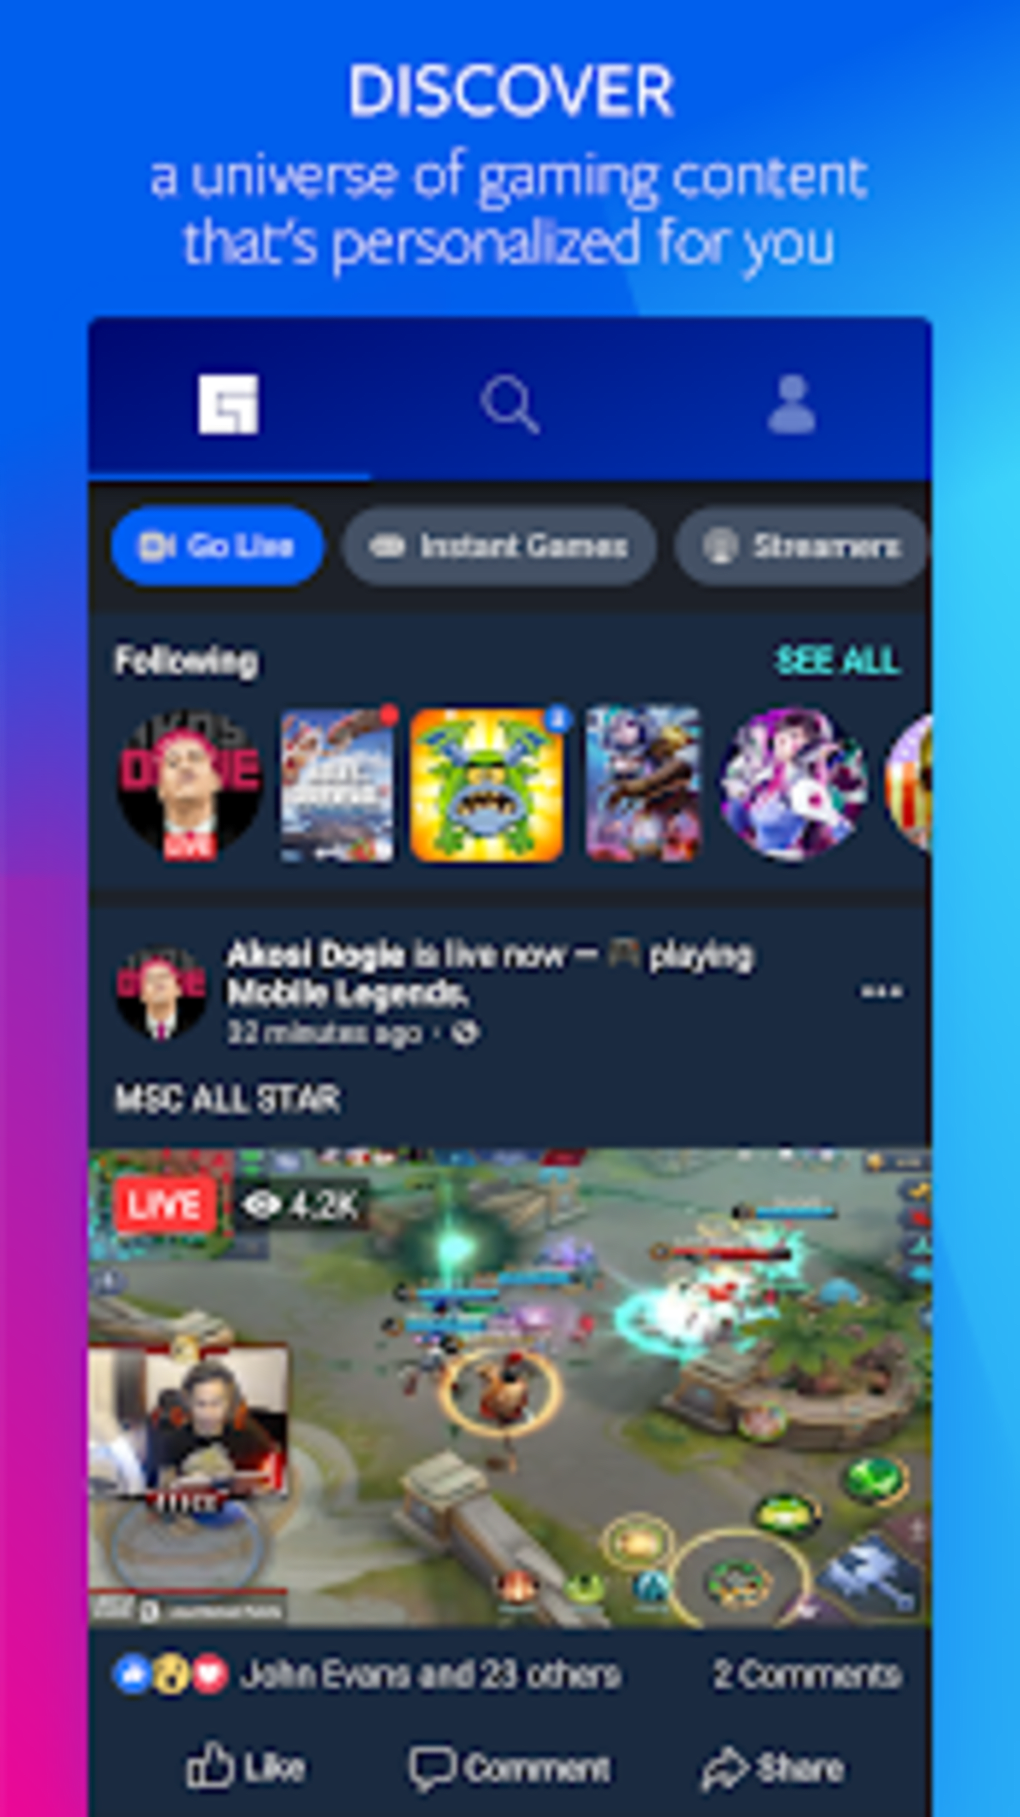 Instant Gaming APK for Android - Download